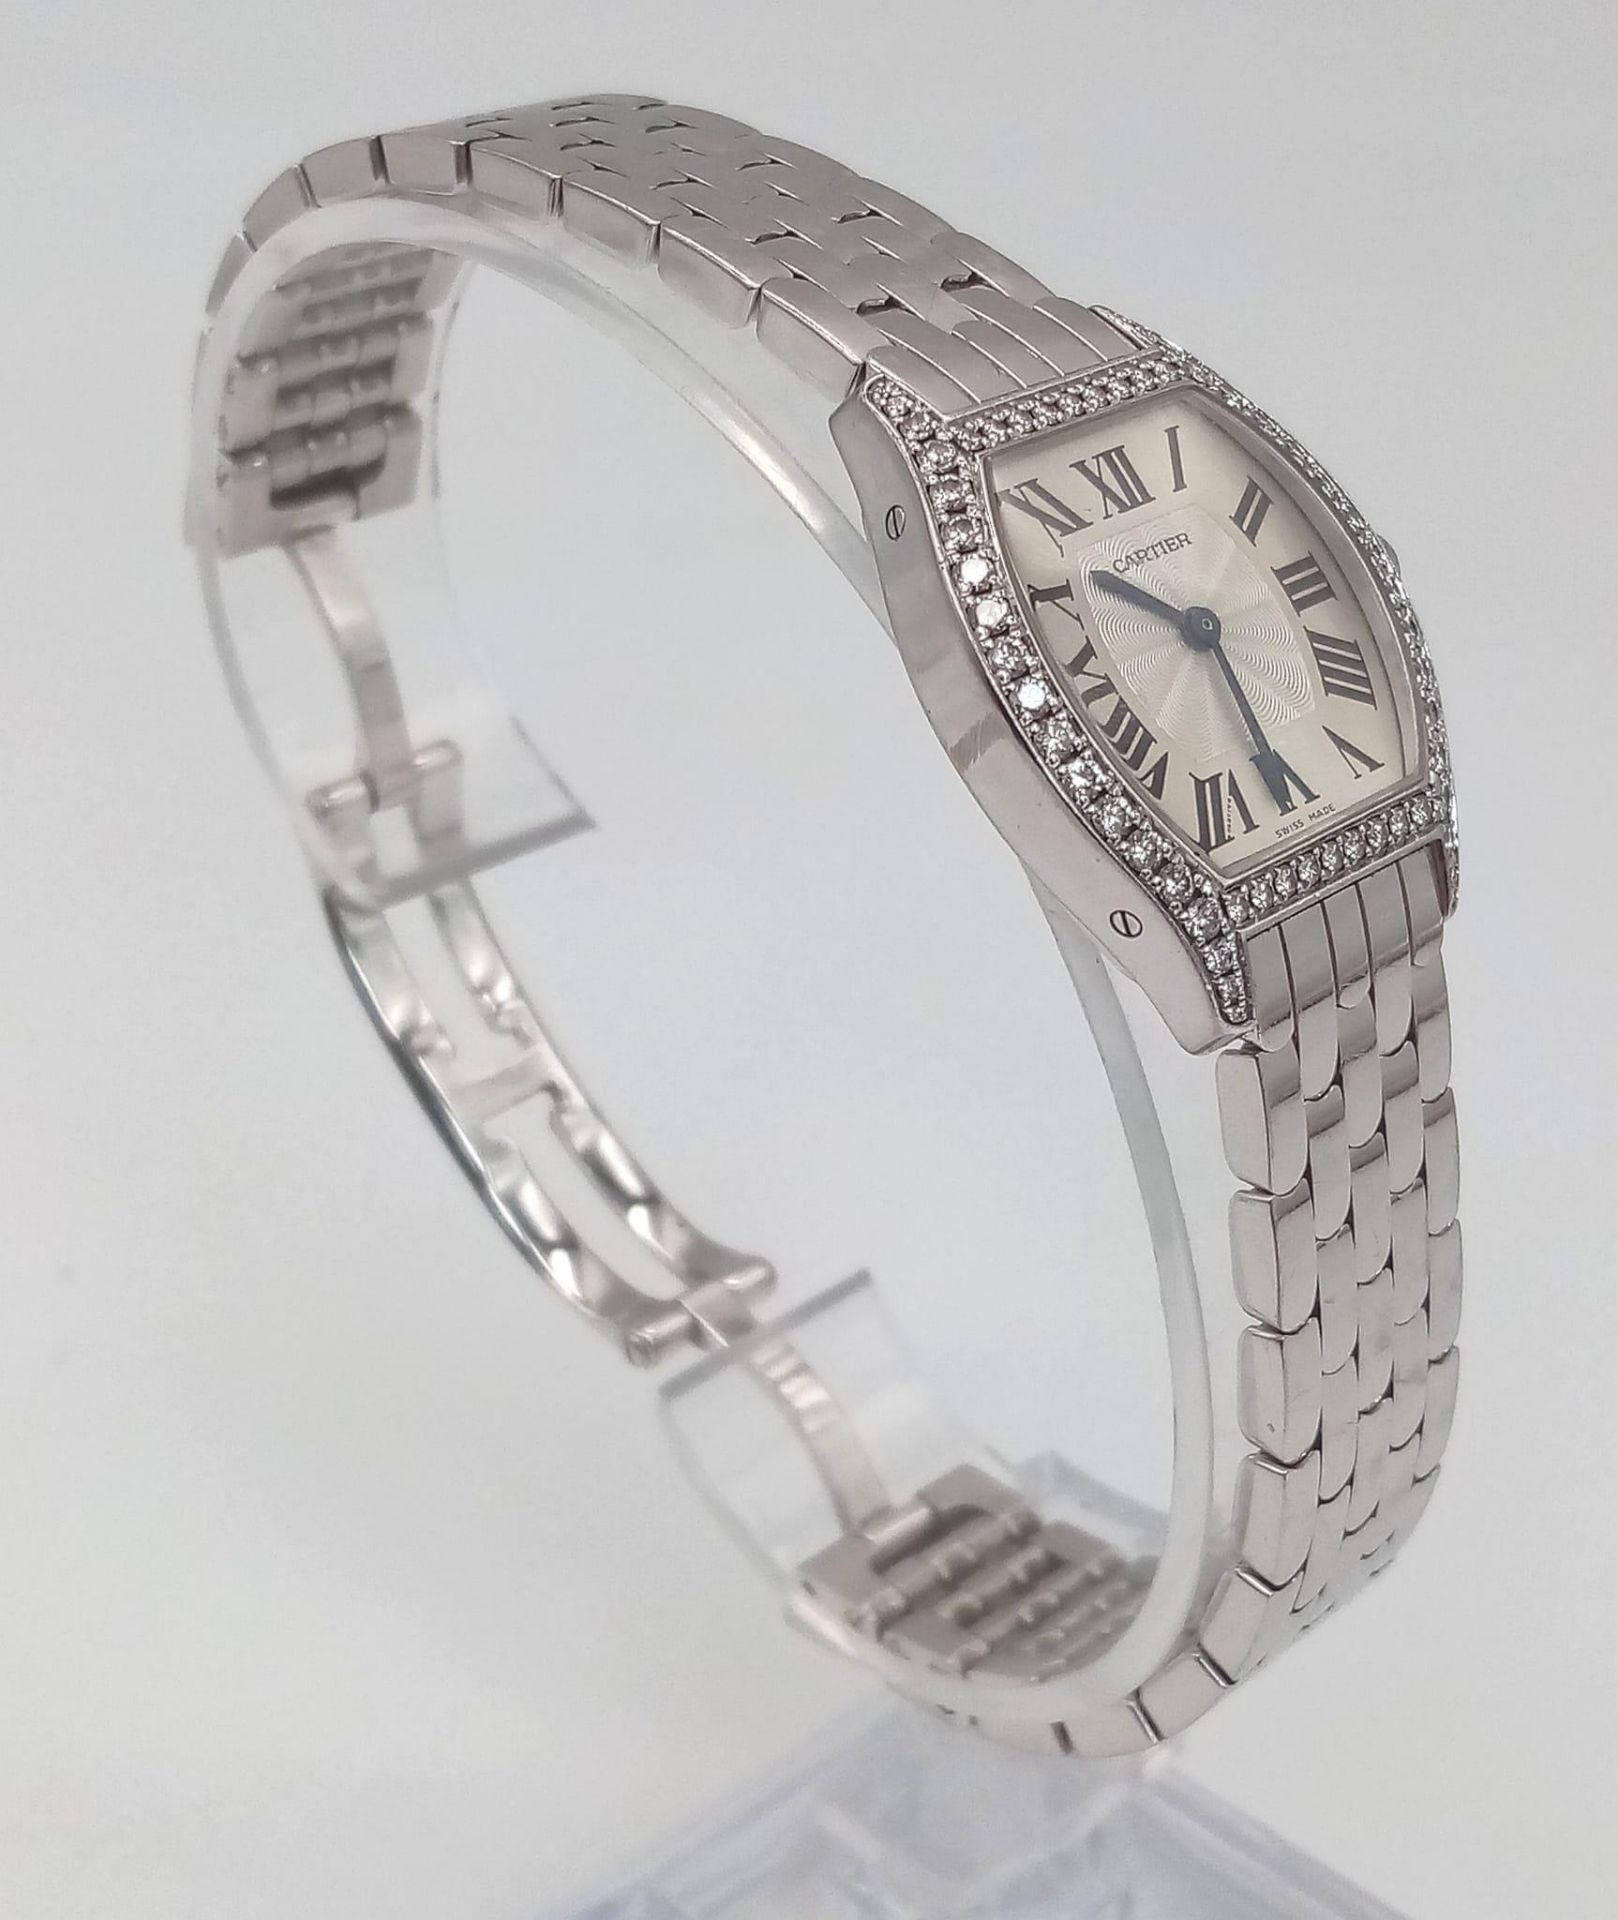 A Cartier Tortue 18K White Gold and Diamonds Ladies Watch. 18k white gold bracelet and case - 30mm x - Image 12 of 23